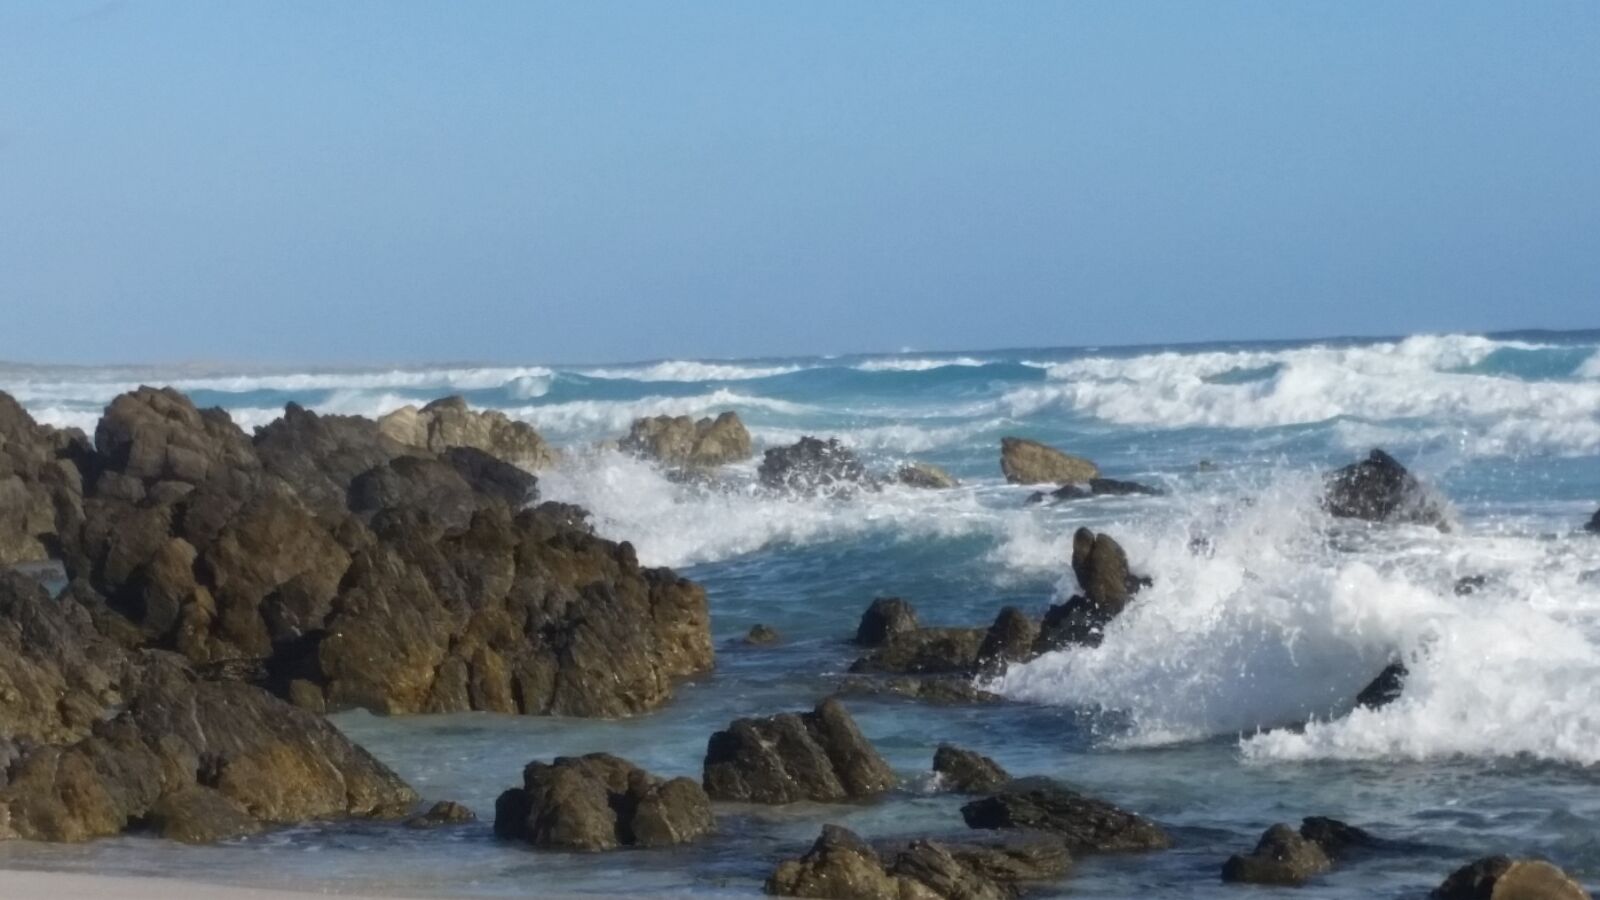 Samsung Galaxy S5 sample photo. Rocks, seascape, rough weather photography